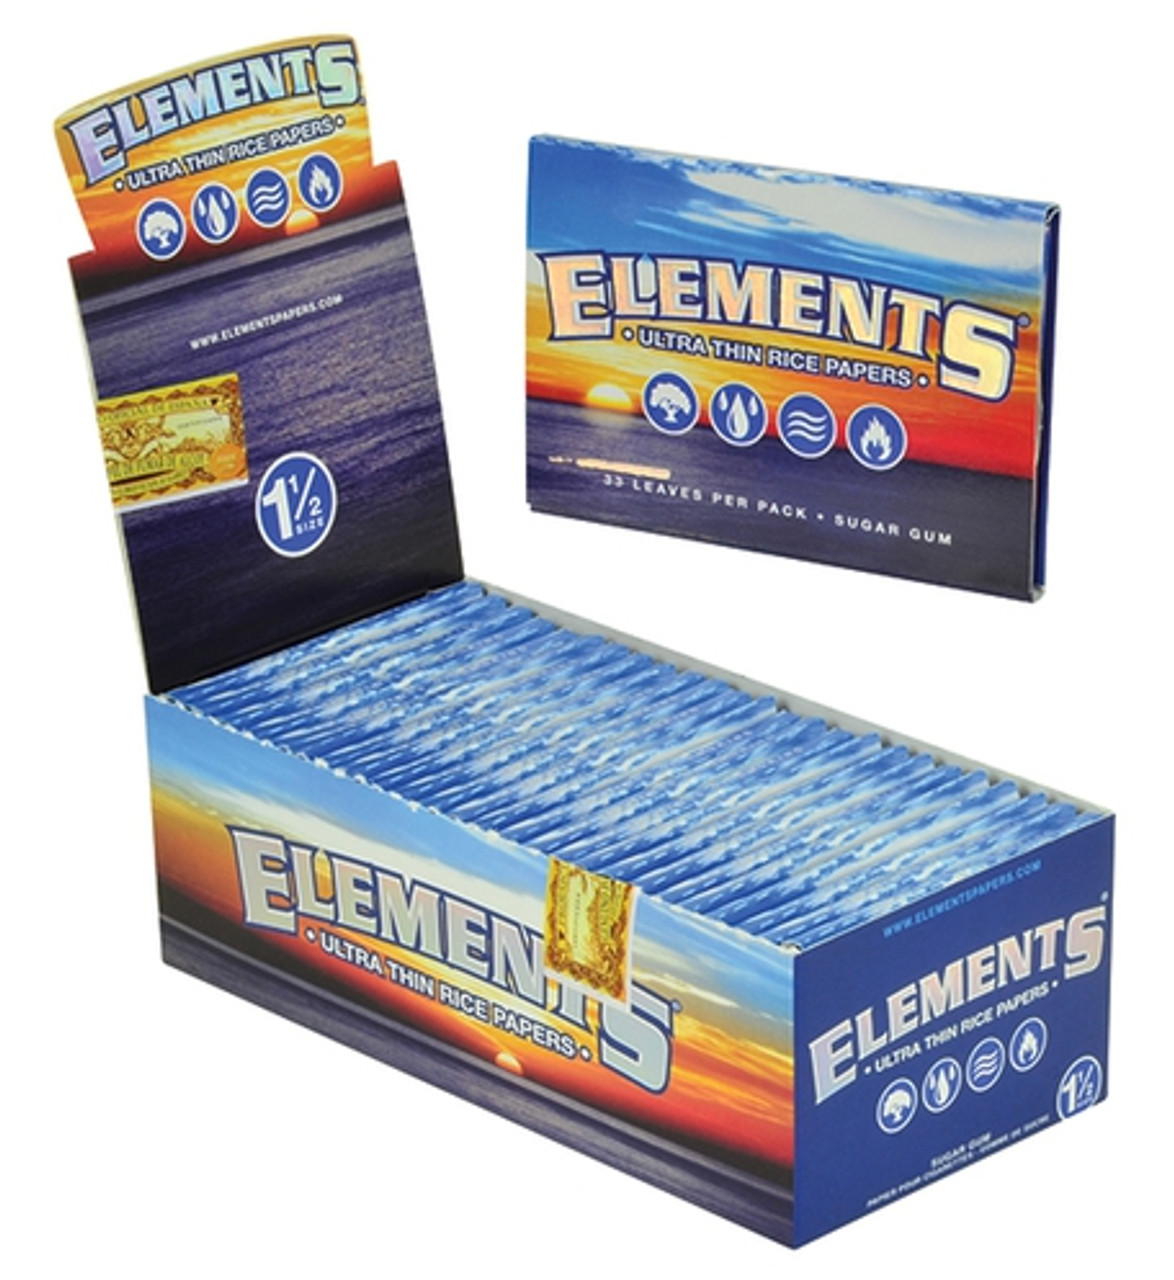 Elements Ultra Thin Kingsize Slim Rice Rolling Papers - 50 Pack